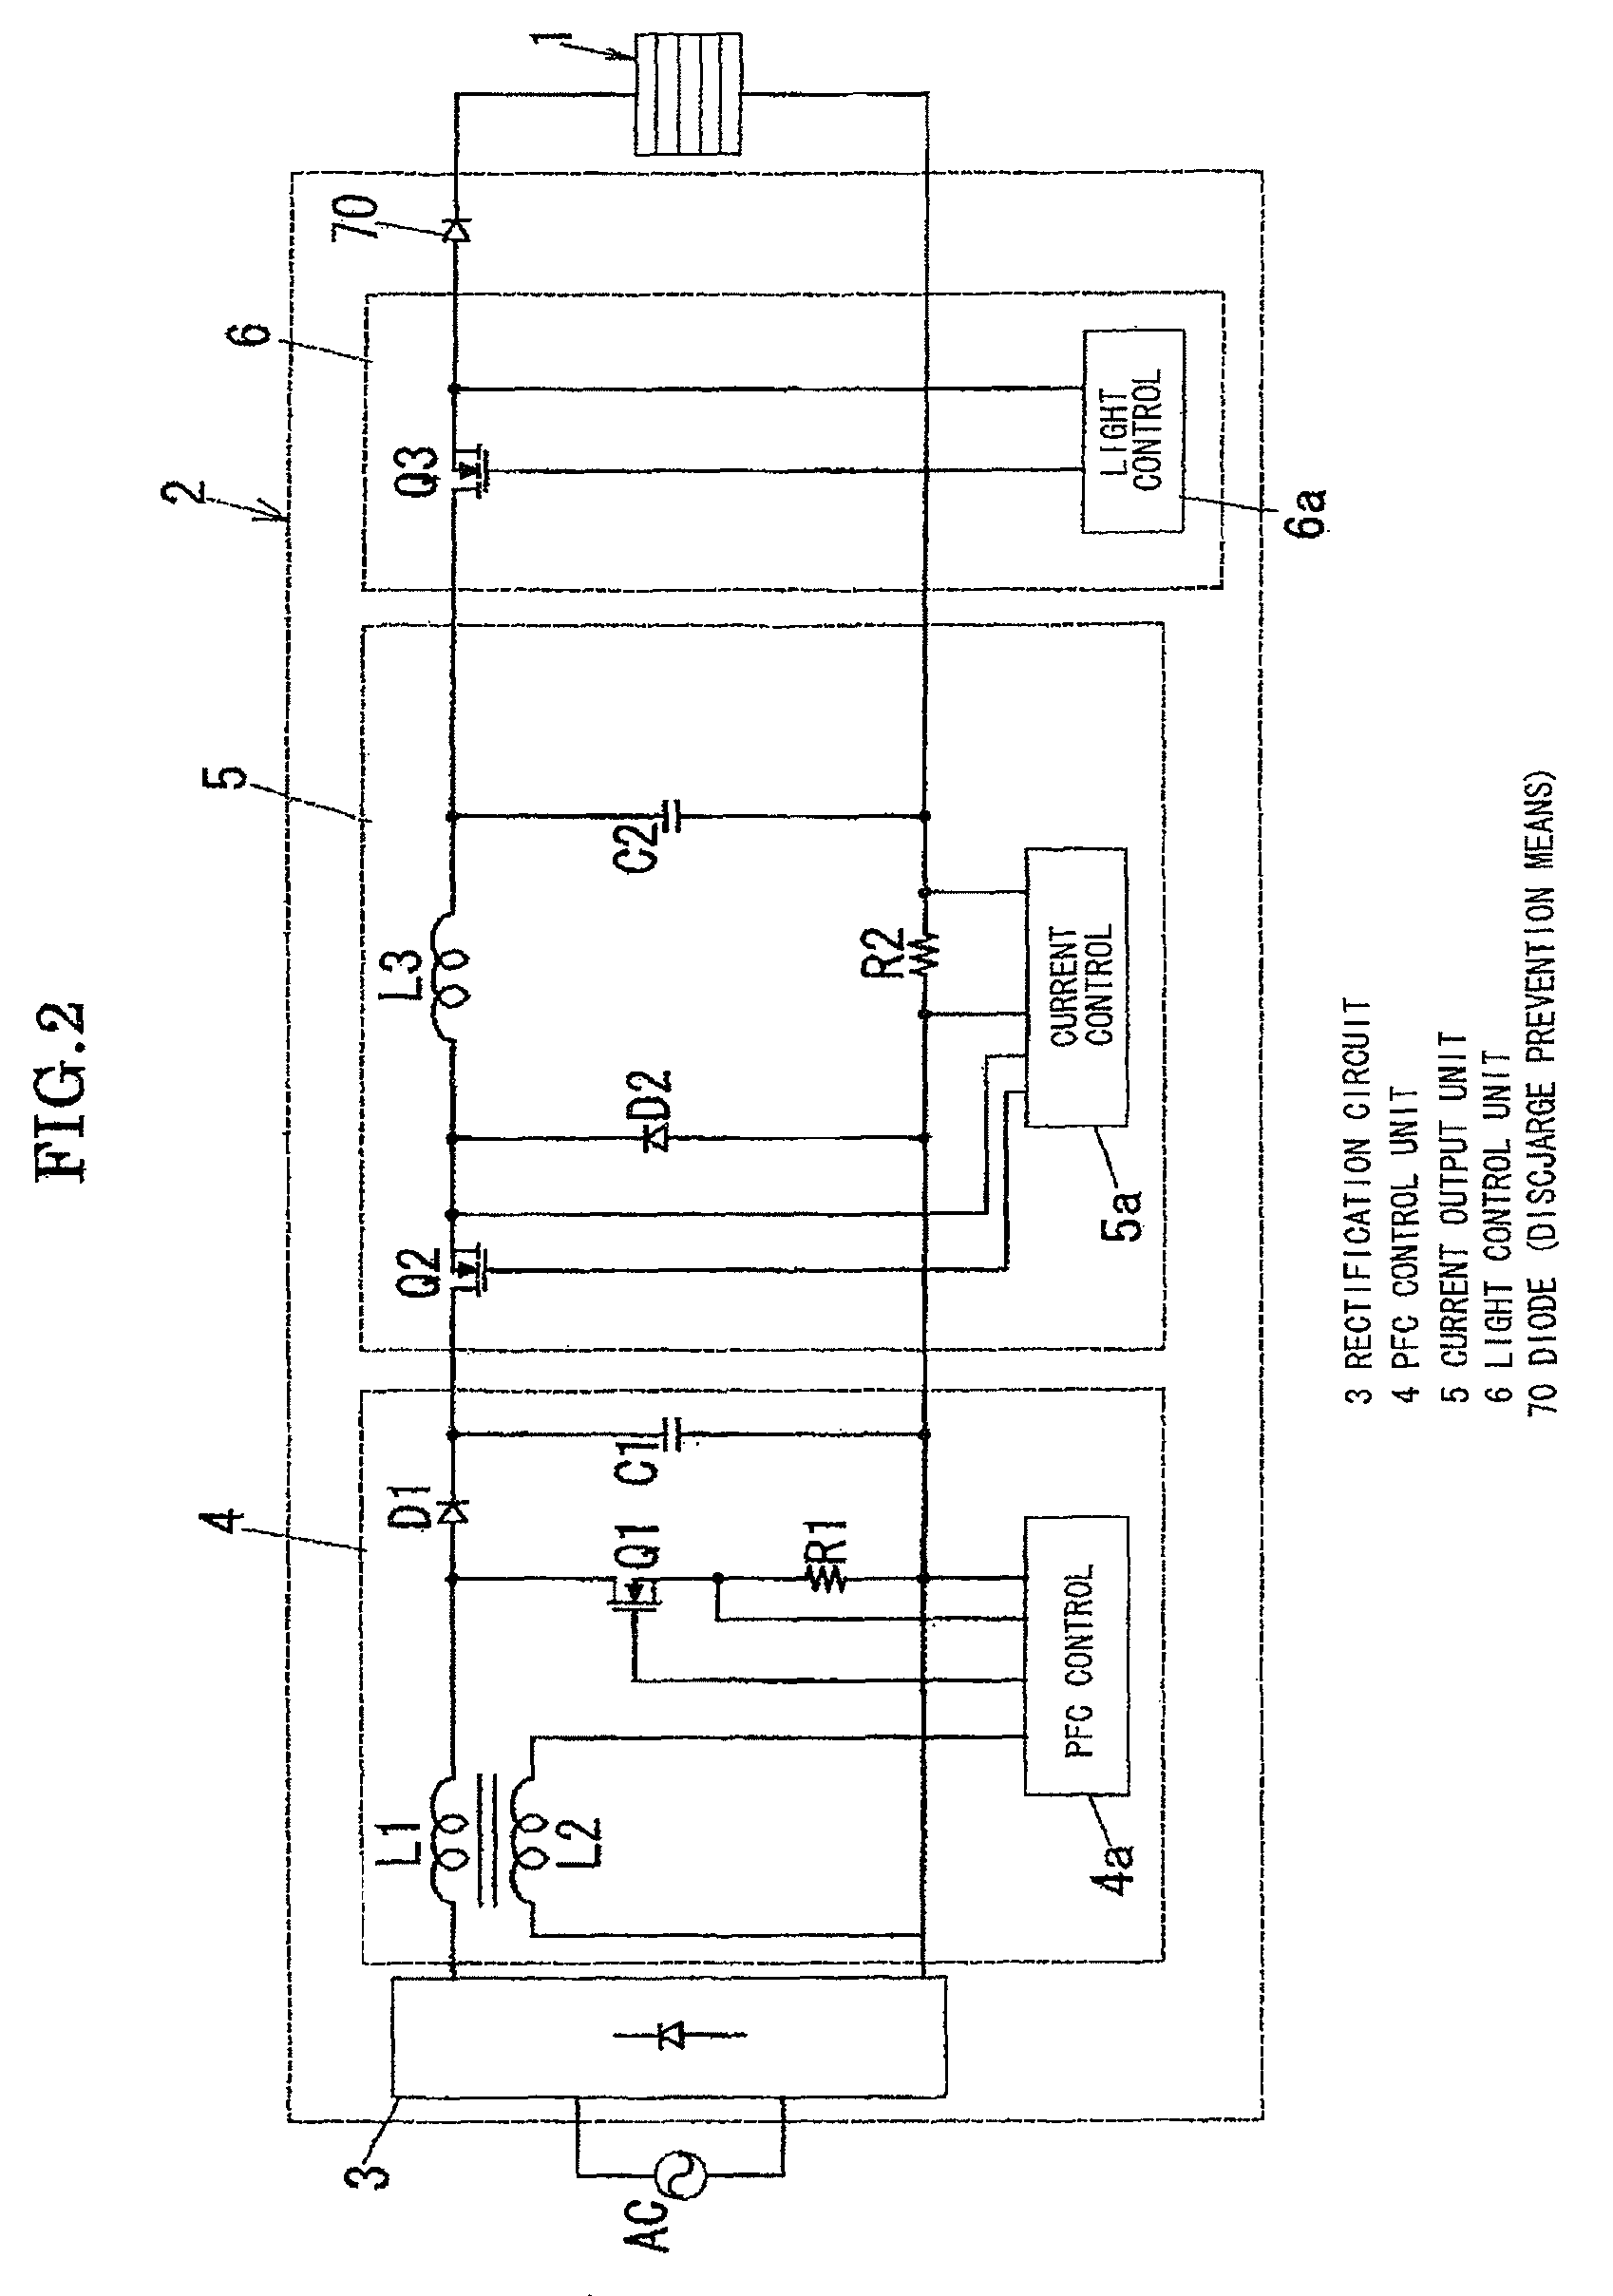 Light control apparatus for lighting an organic electroluminescence device and lighting appliance using the same